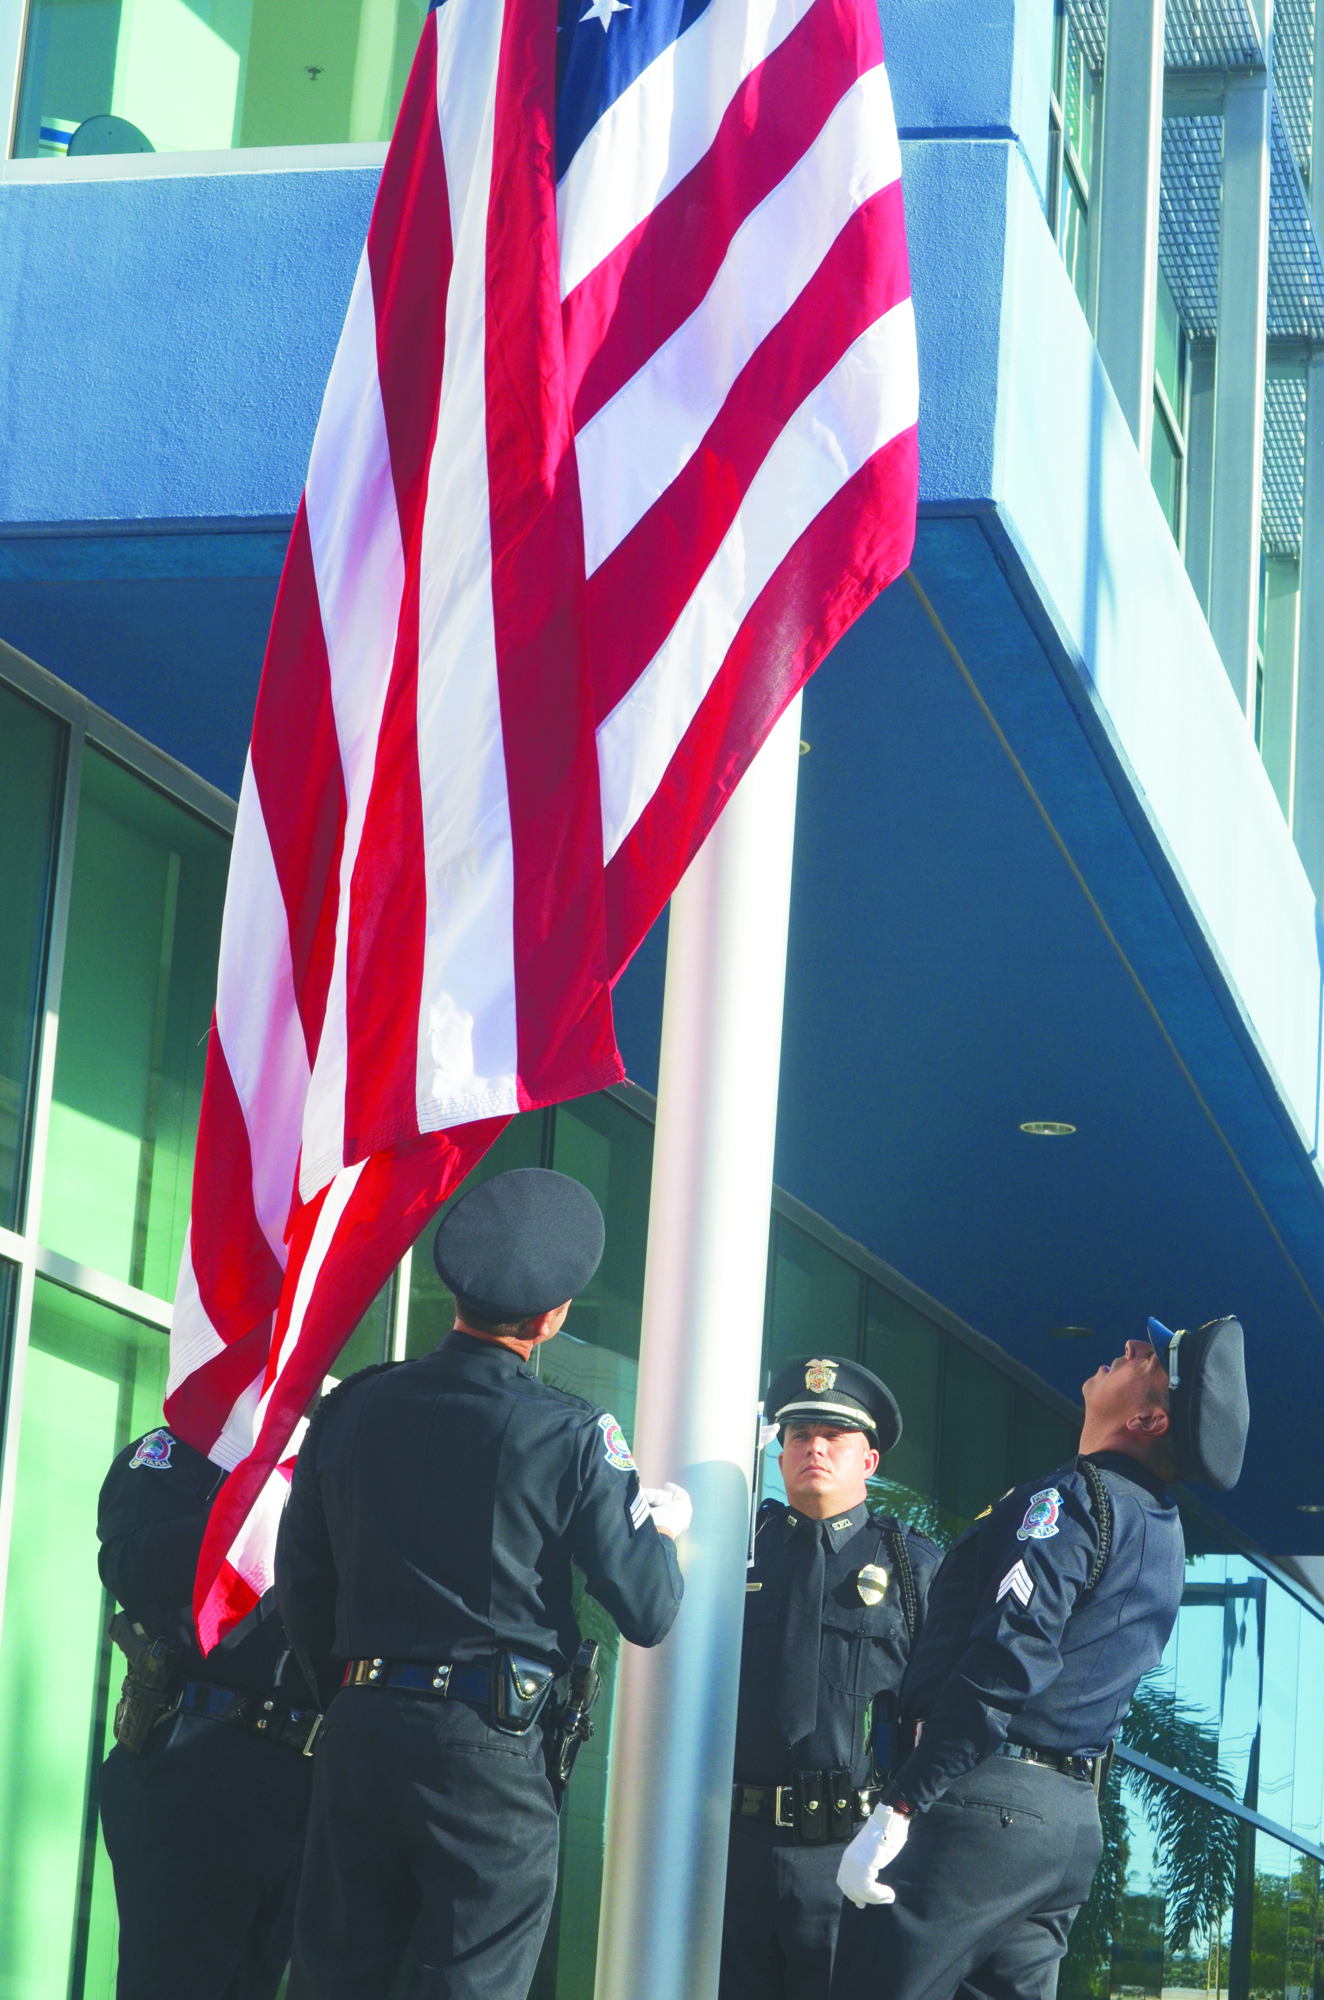 File photo. Sarasota Police Sgts. Mark Opitz, Rex Troche, Mike Schwieterman and Officer Brian Singley raise the American flag during a 2013 ceremony.